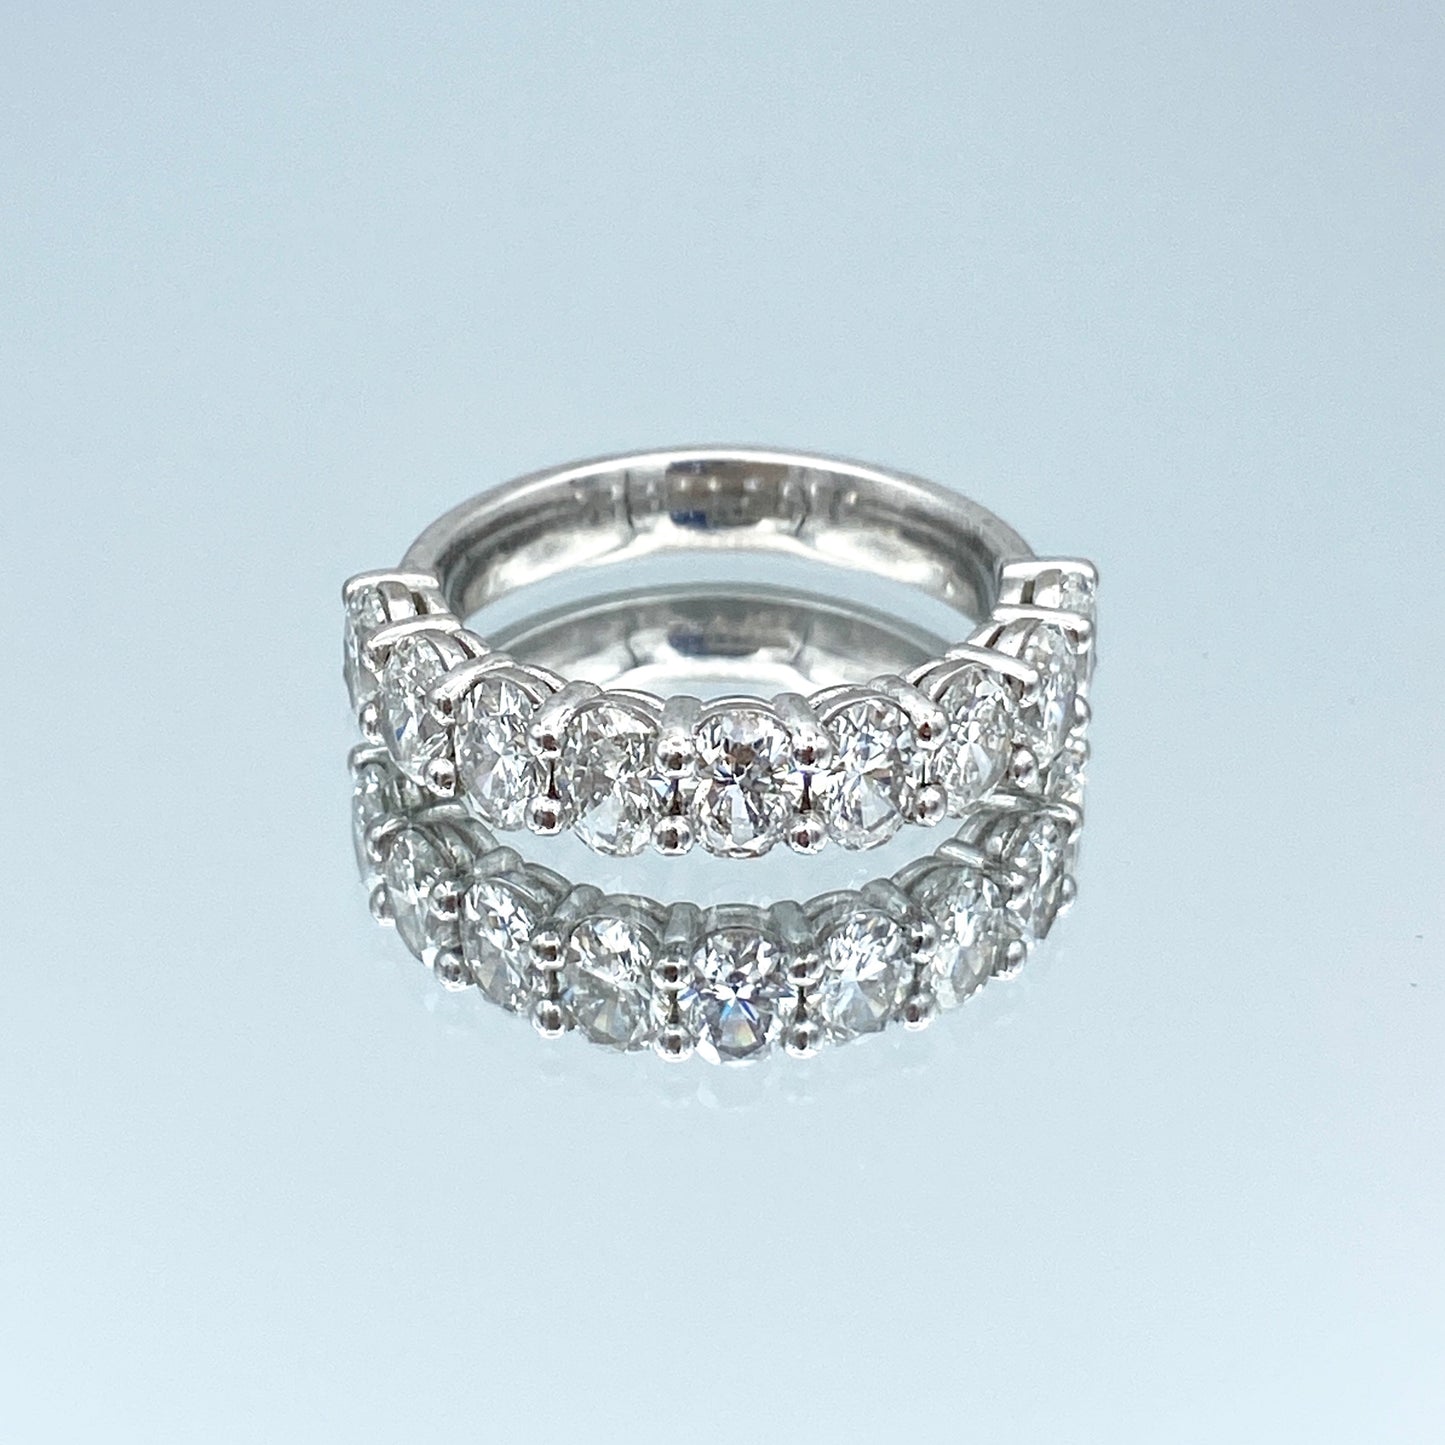 Nine-Stone Oval-Cut Diamond Ring in 14K White Gold - L and L Jewelry